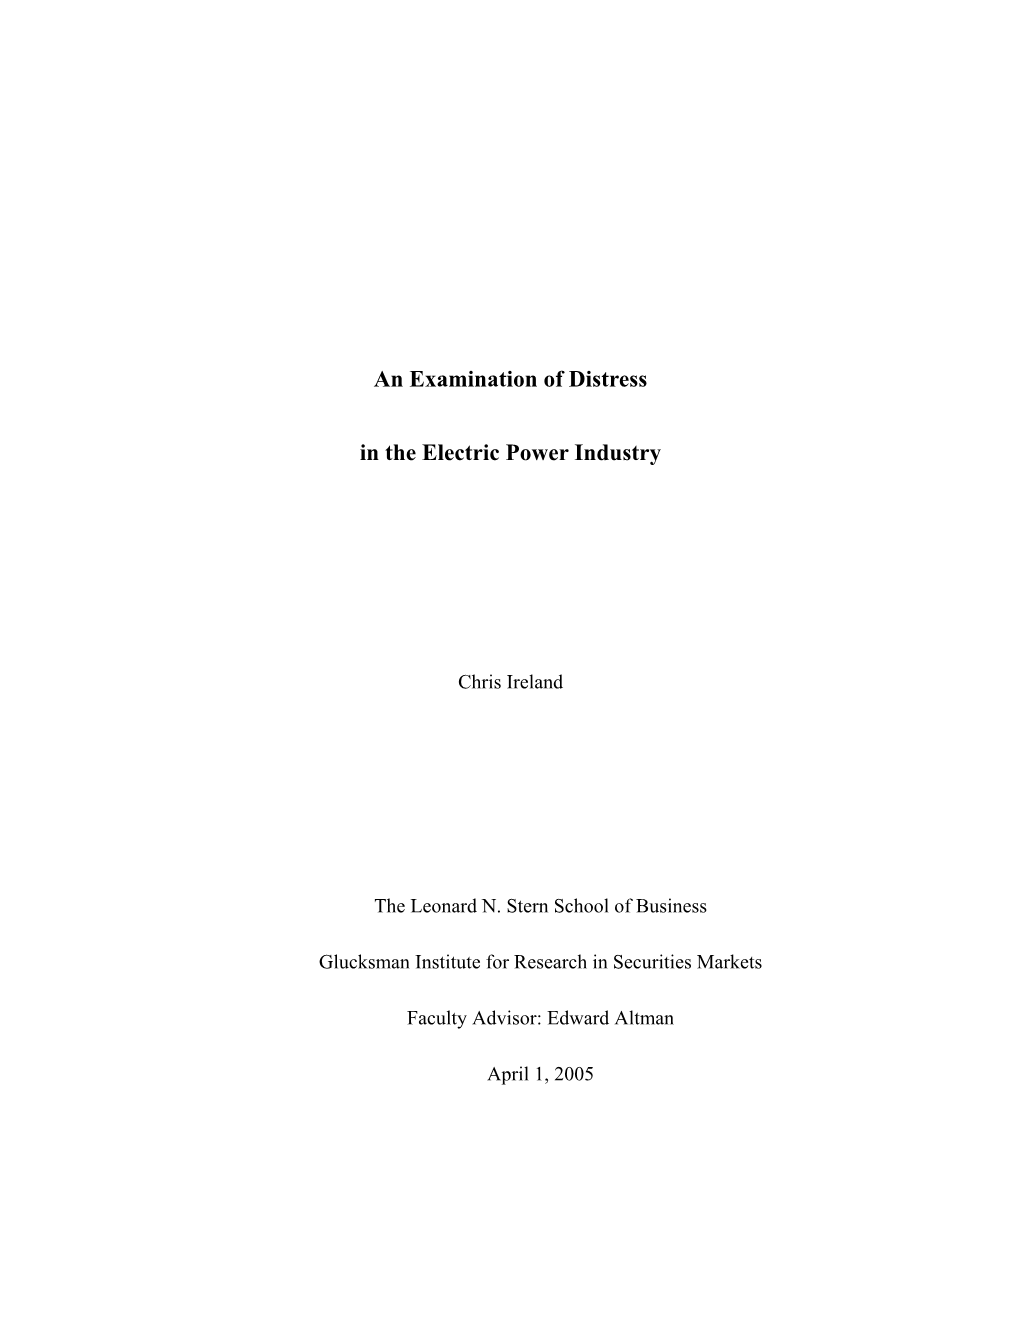 An Examination of Distress in the Electric Power Industry